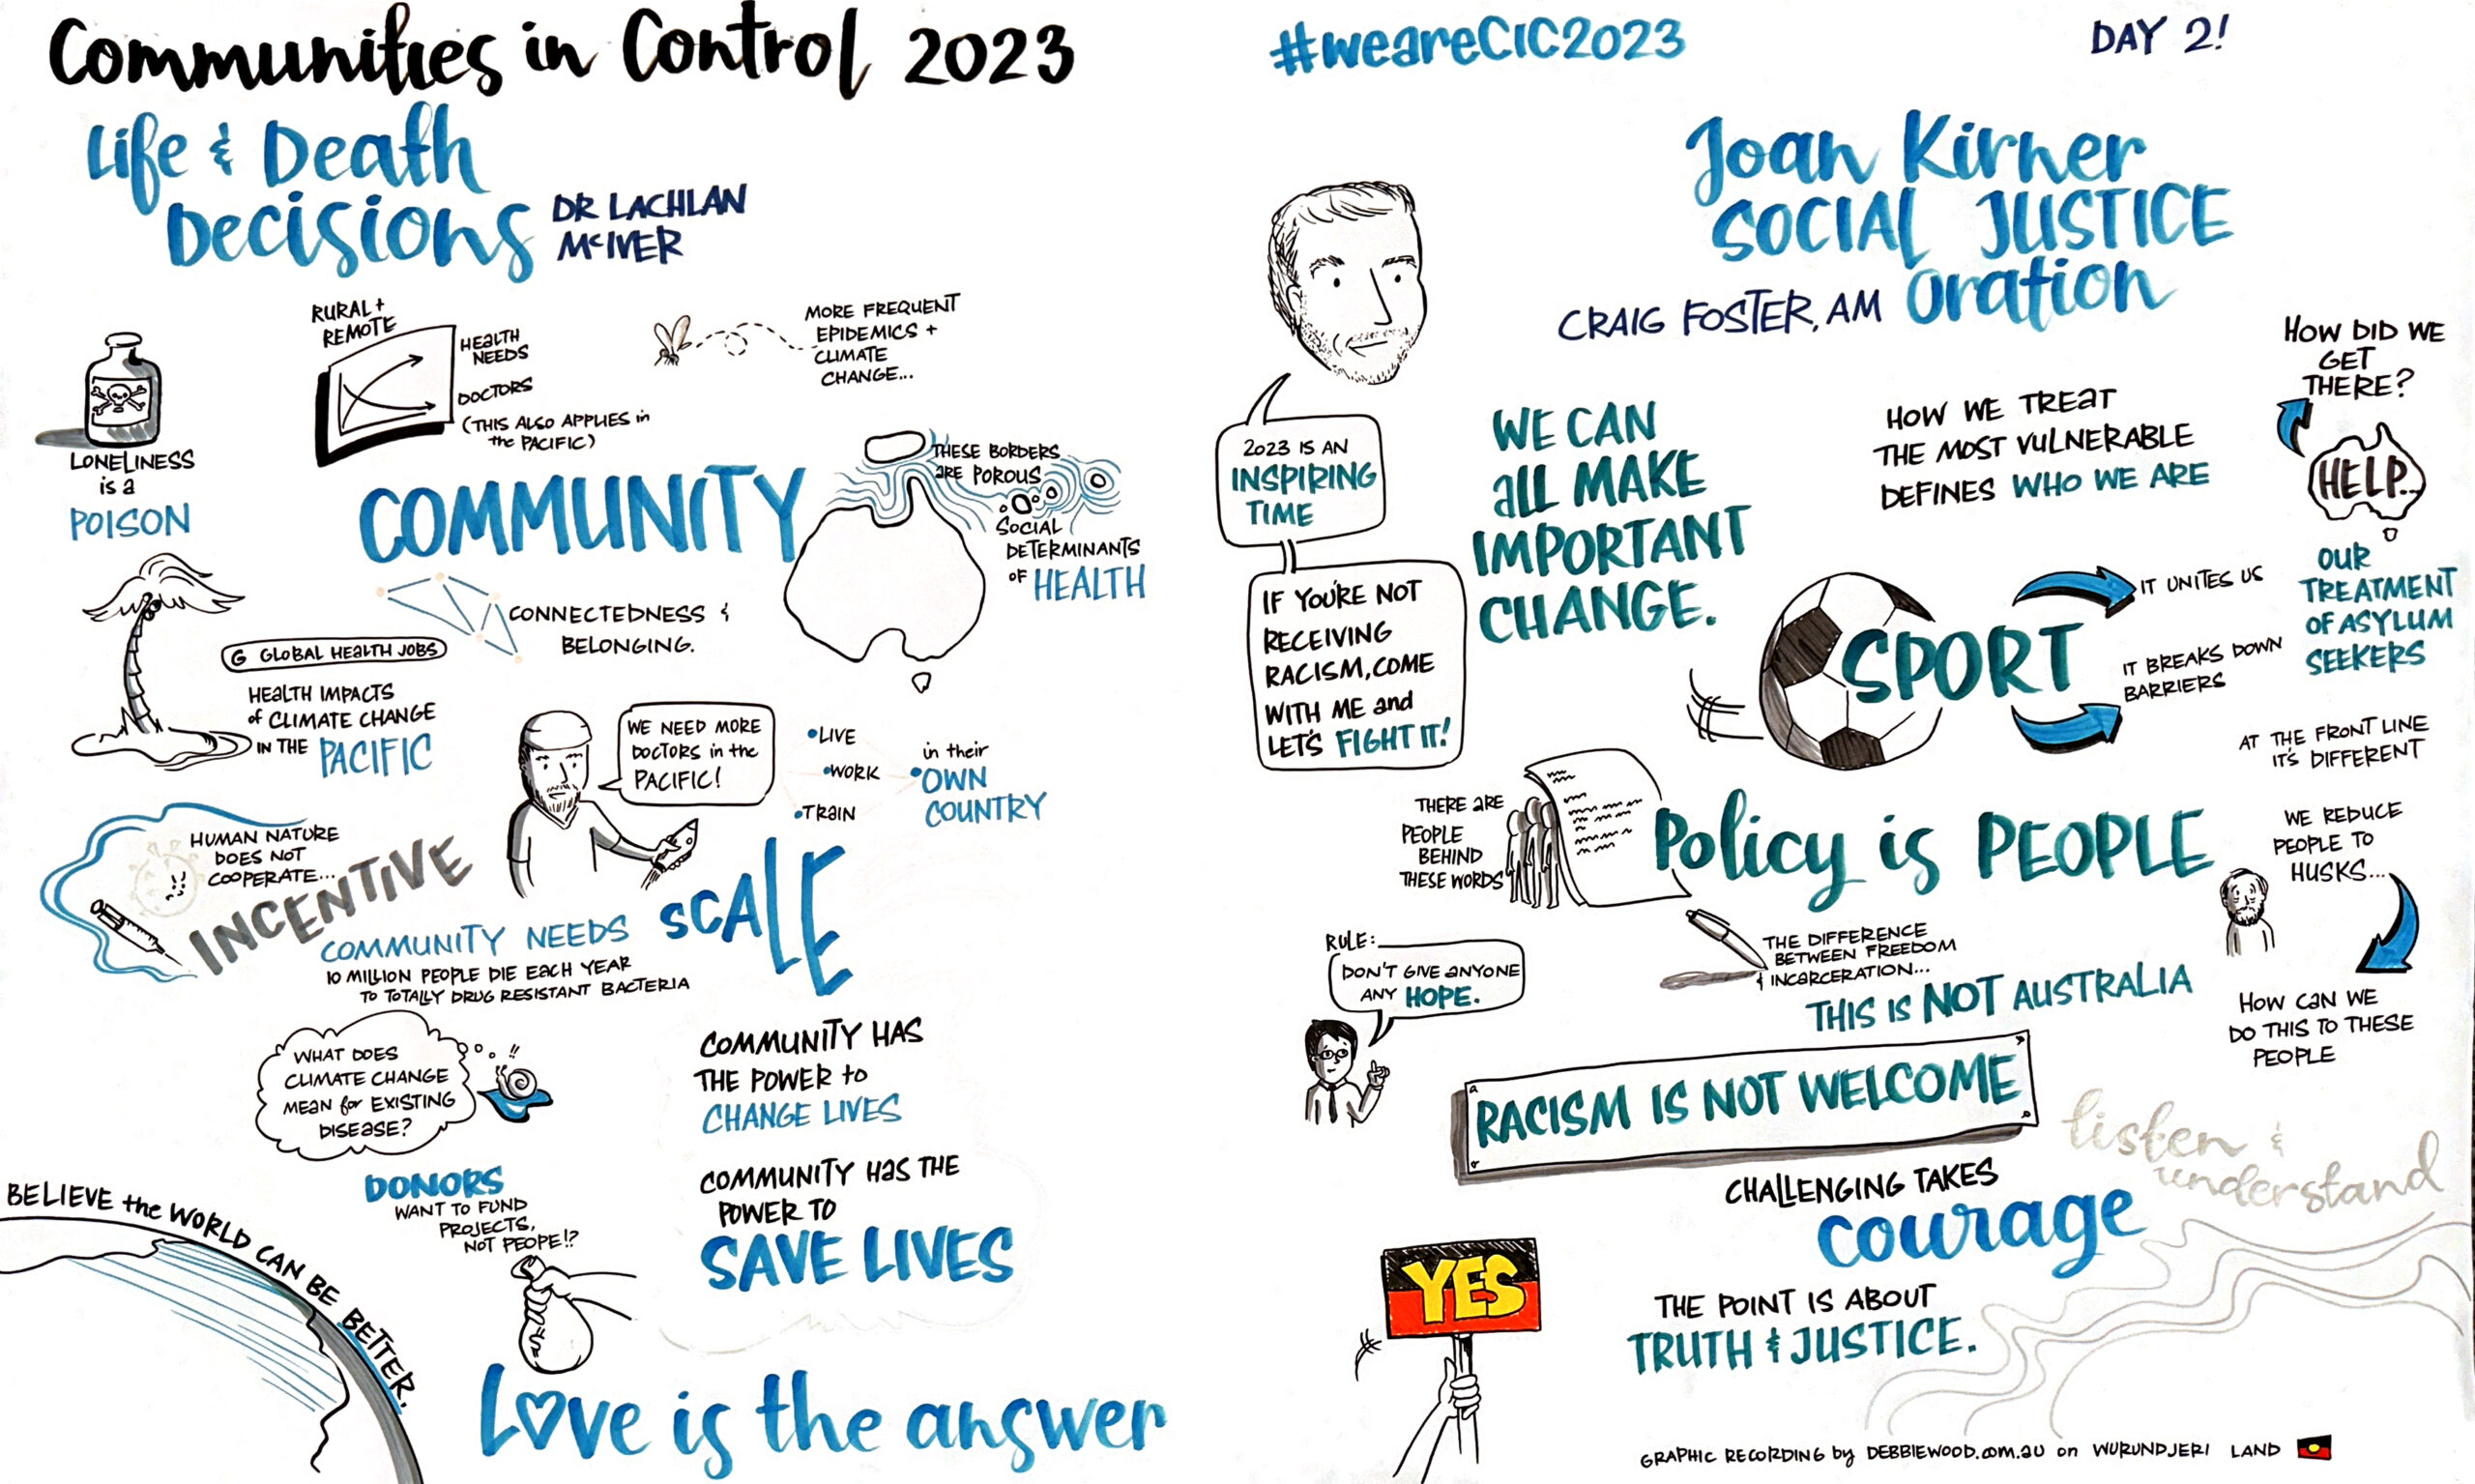 Graphic Recording from Communities in Control 2023